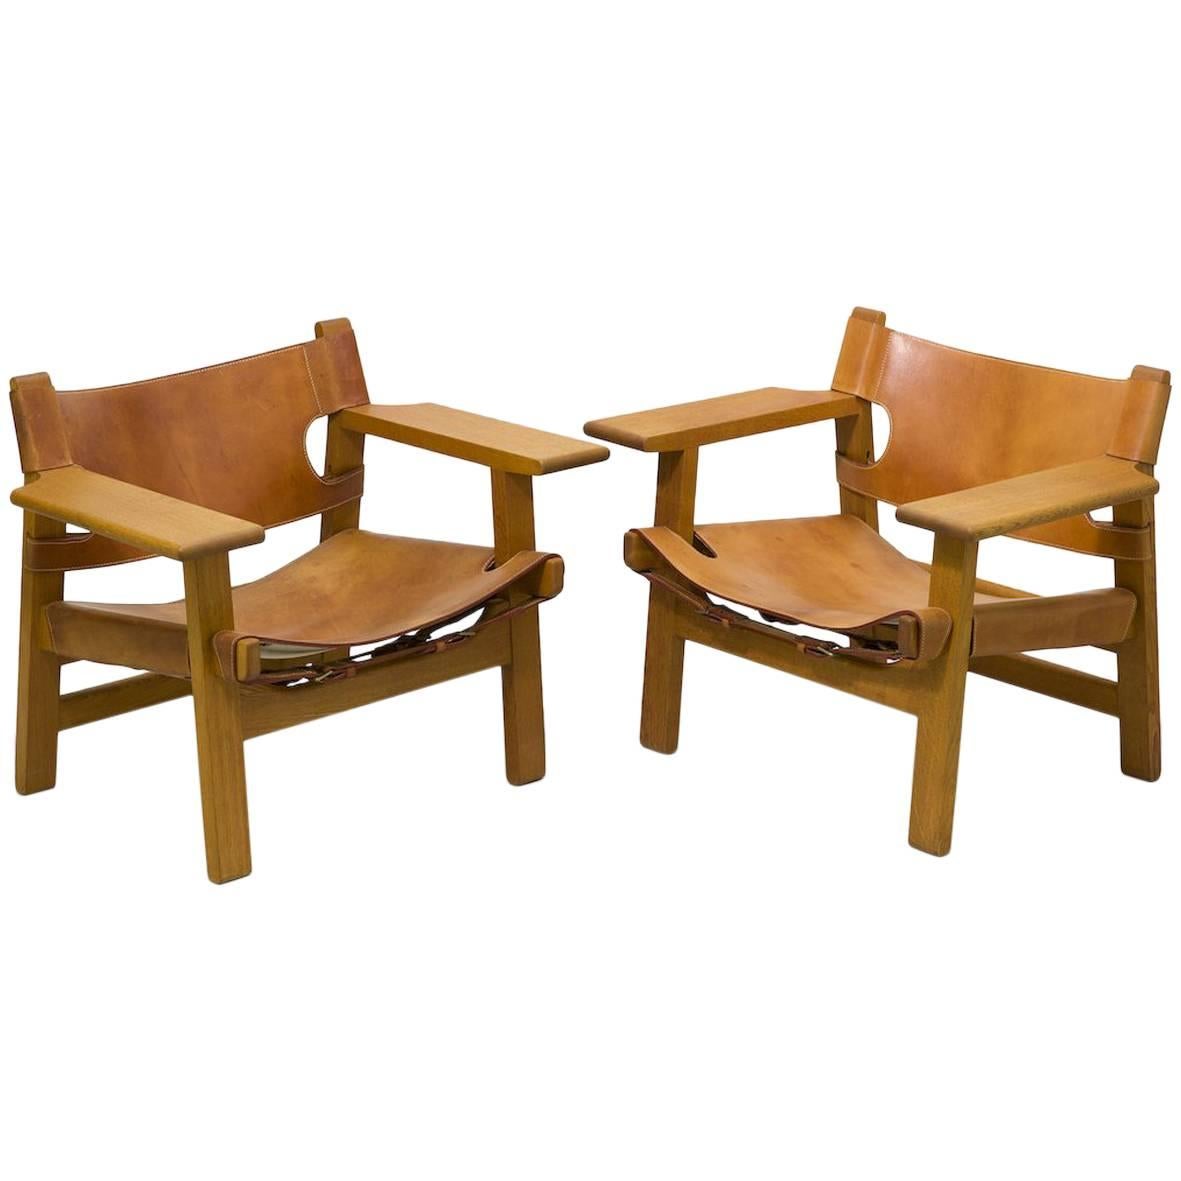 Excellent Condition Vintage Pair of Spanish Armchairs by Børge Mogensen